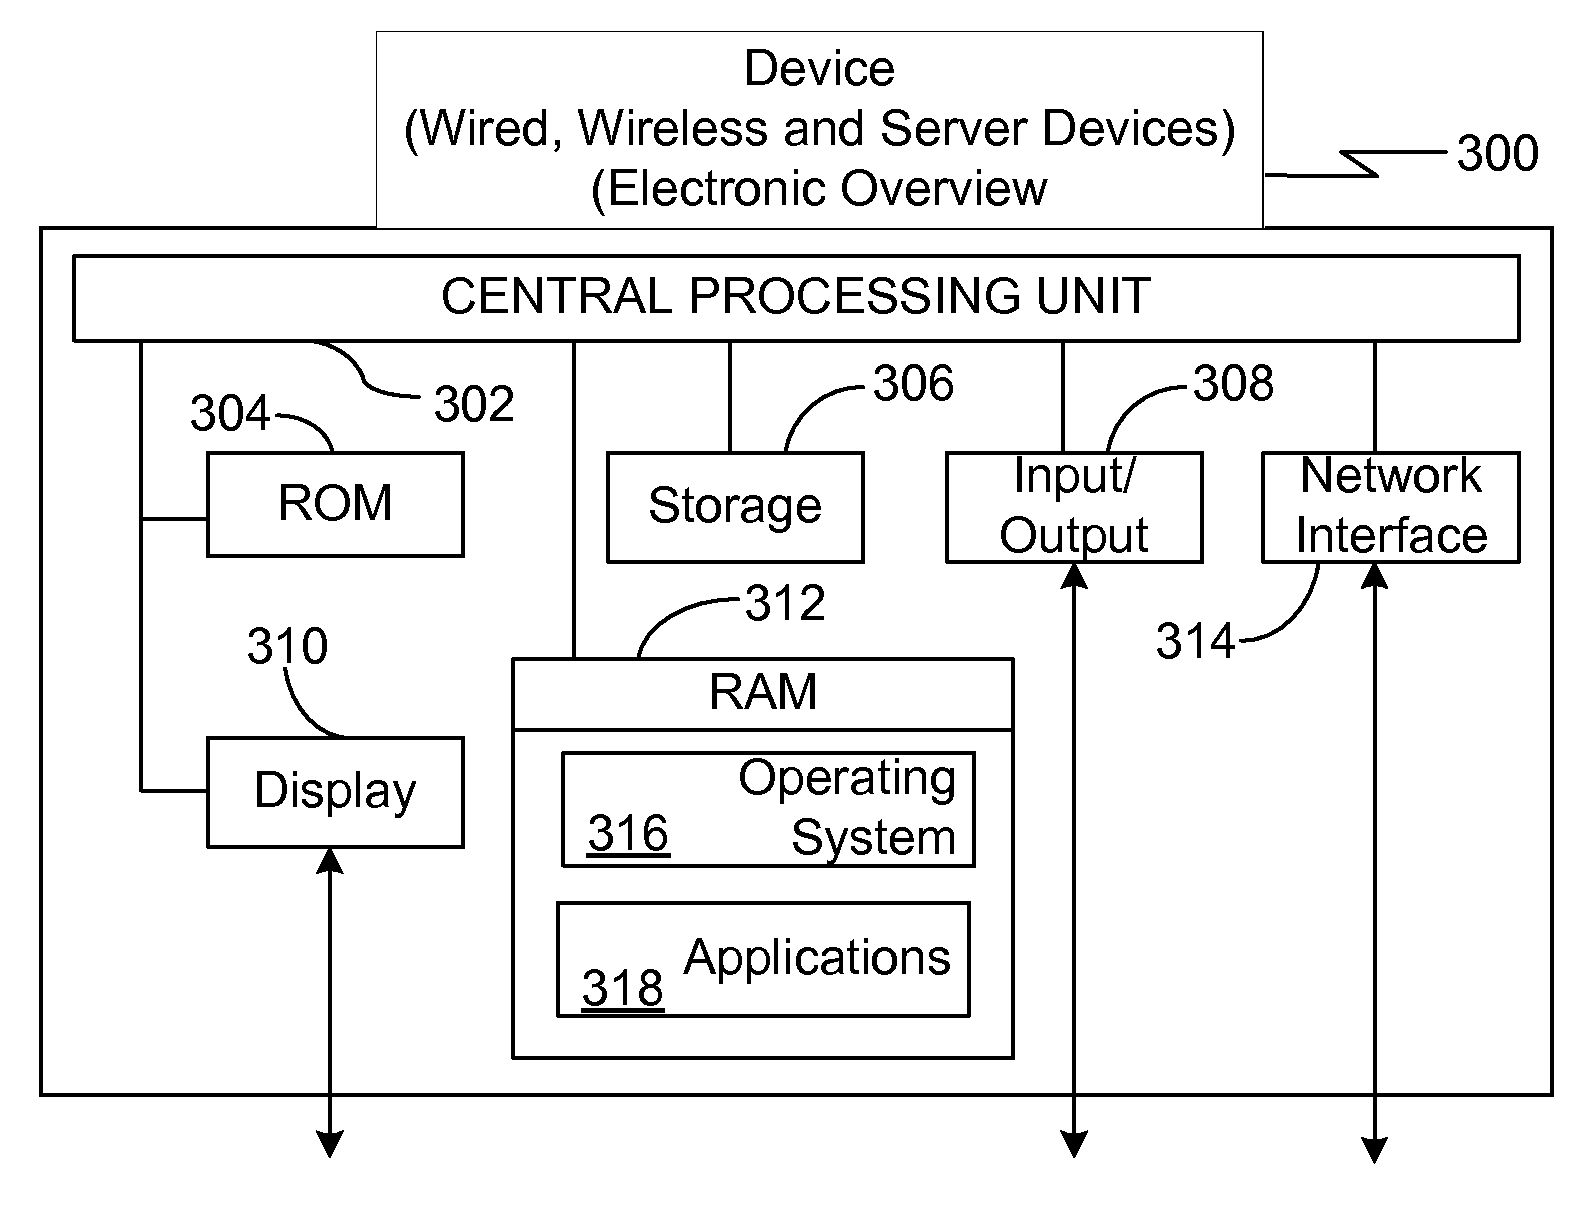 Virtual email method for preventing delivery of undesired electronic messages